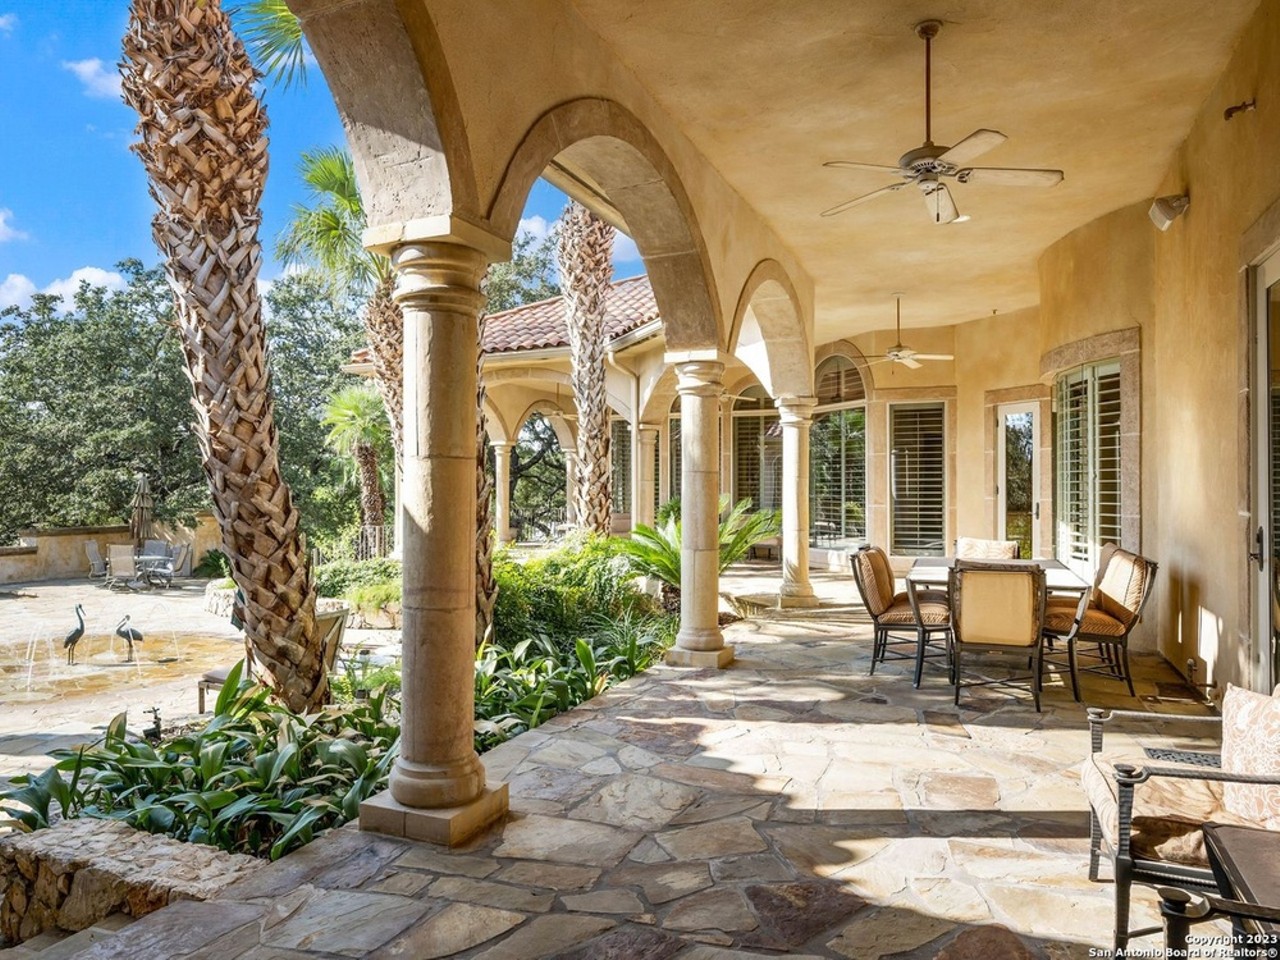 The president of San Antonio finance firm SWBC is selling his mansion in the Dominion